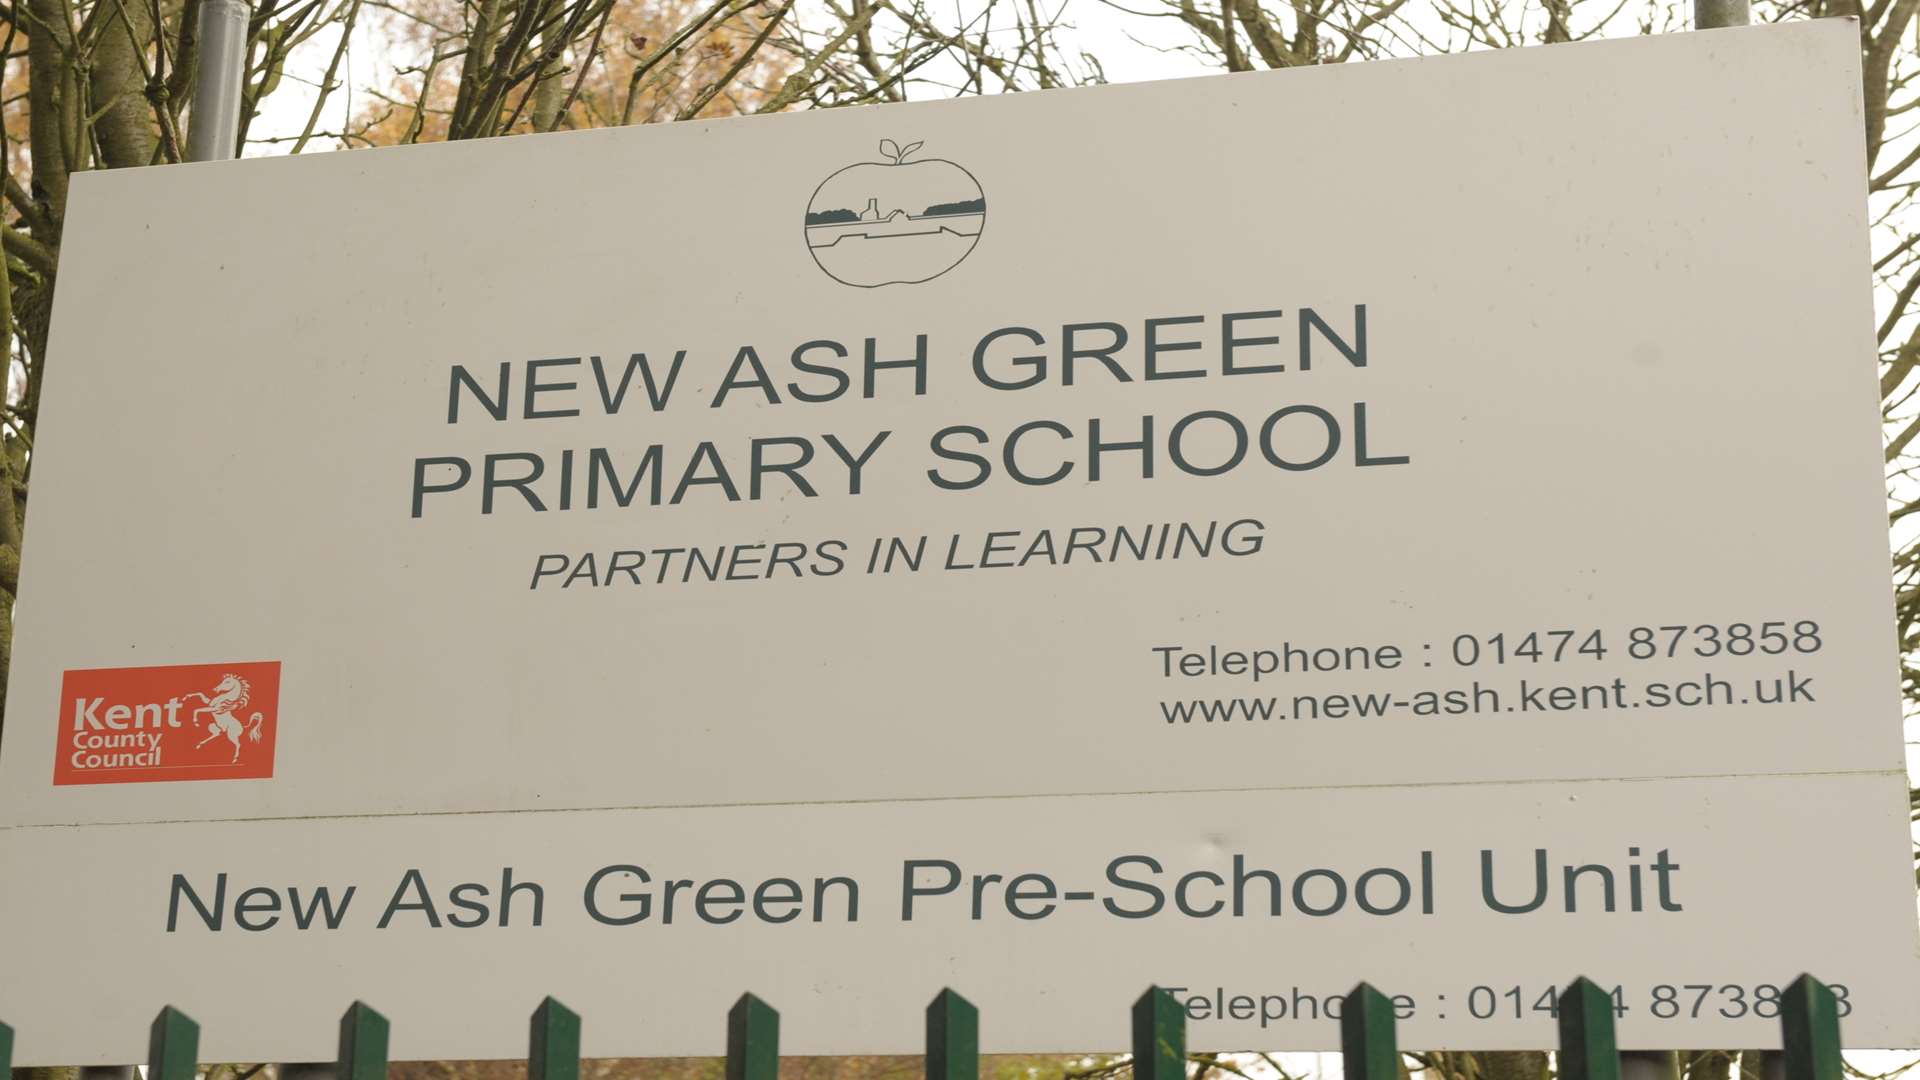 New Ash Green Primary